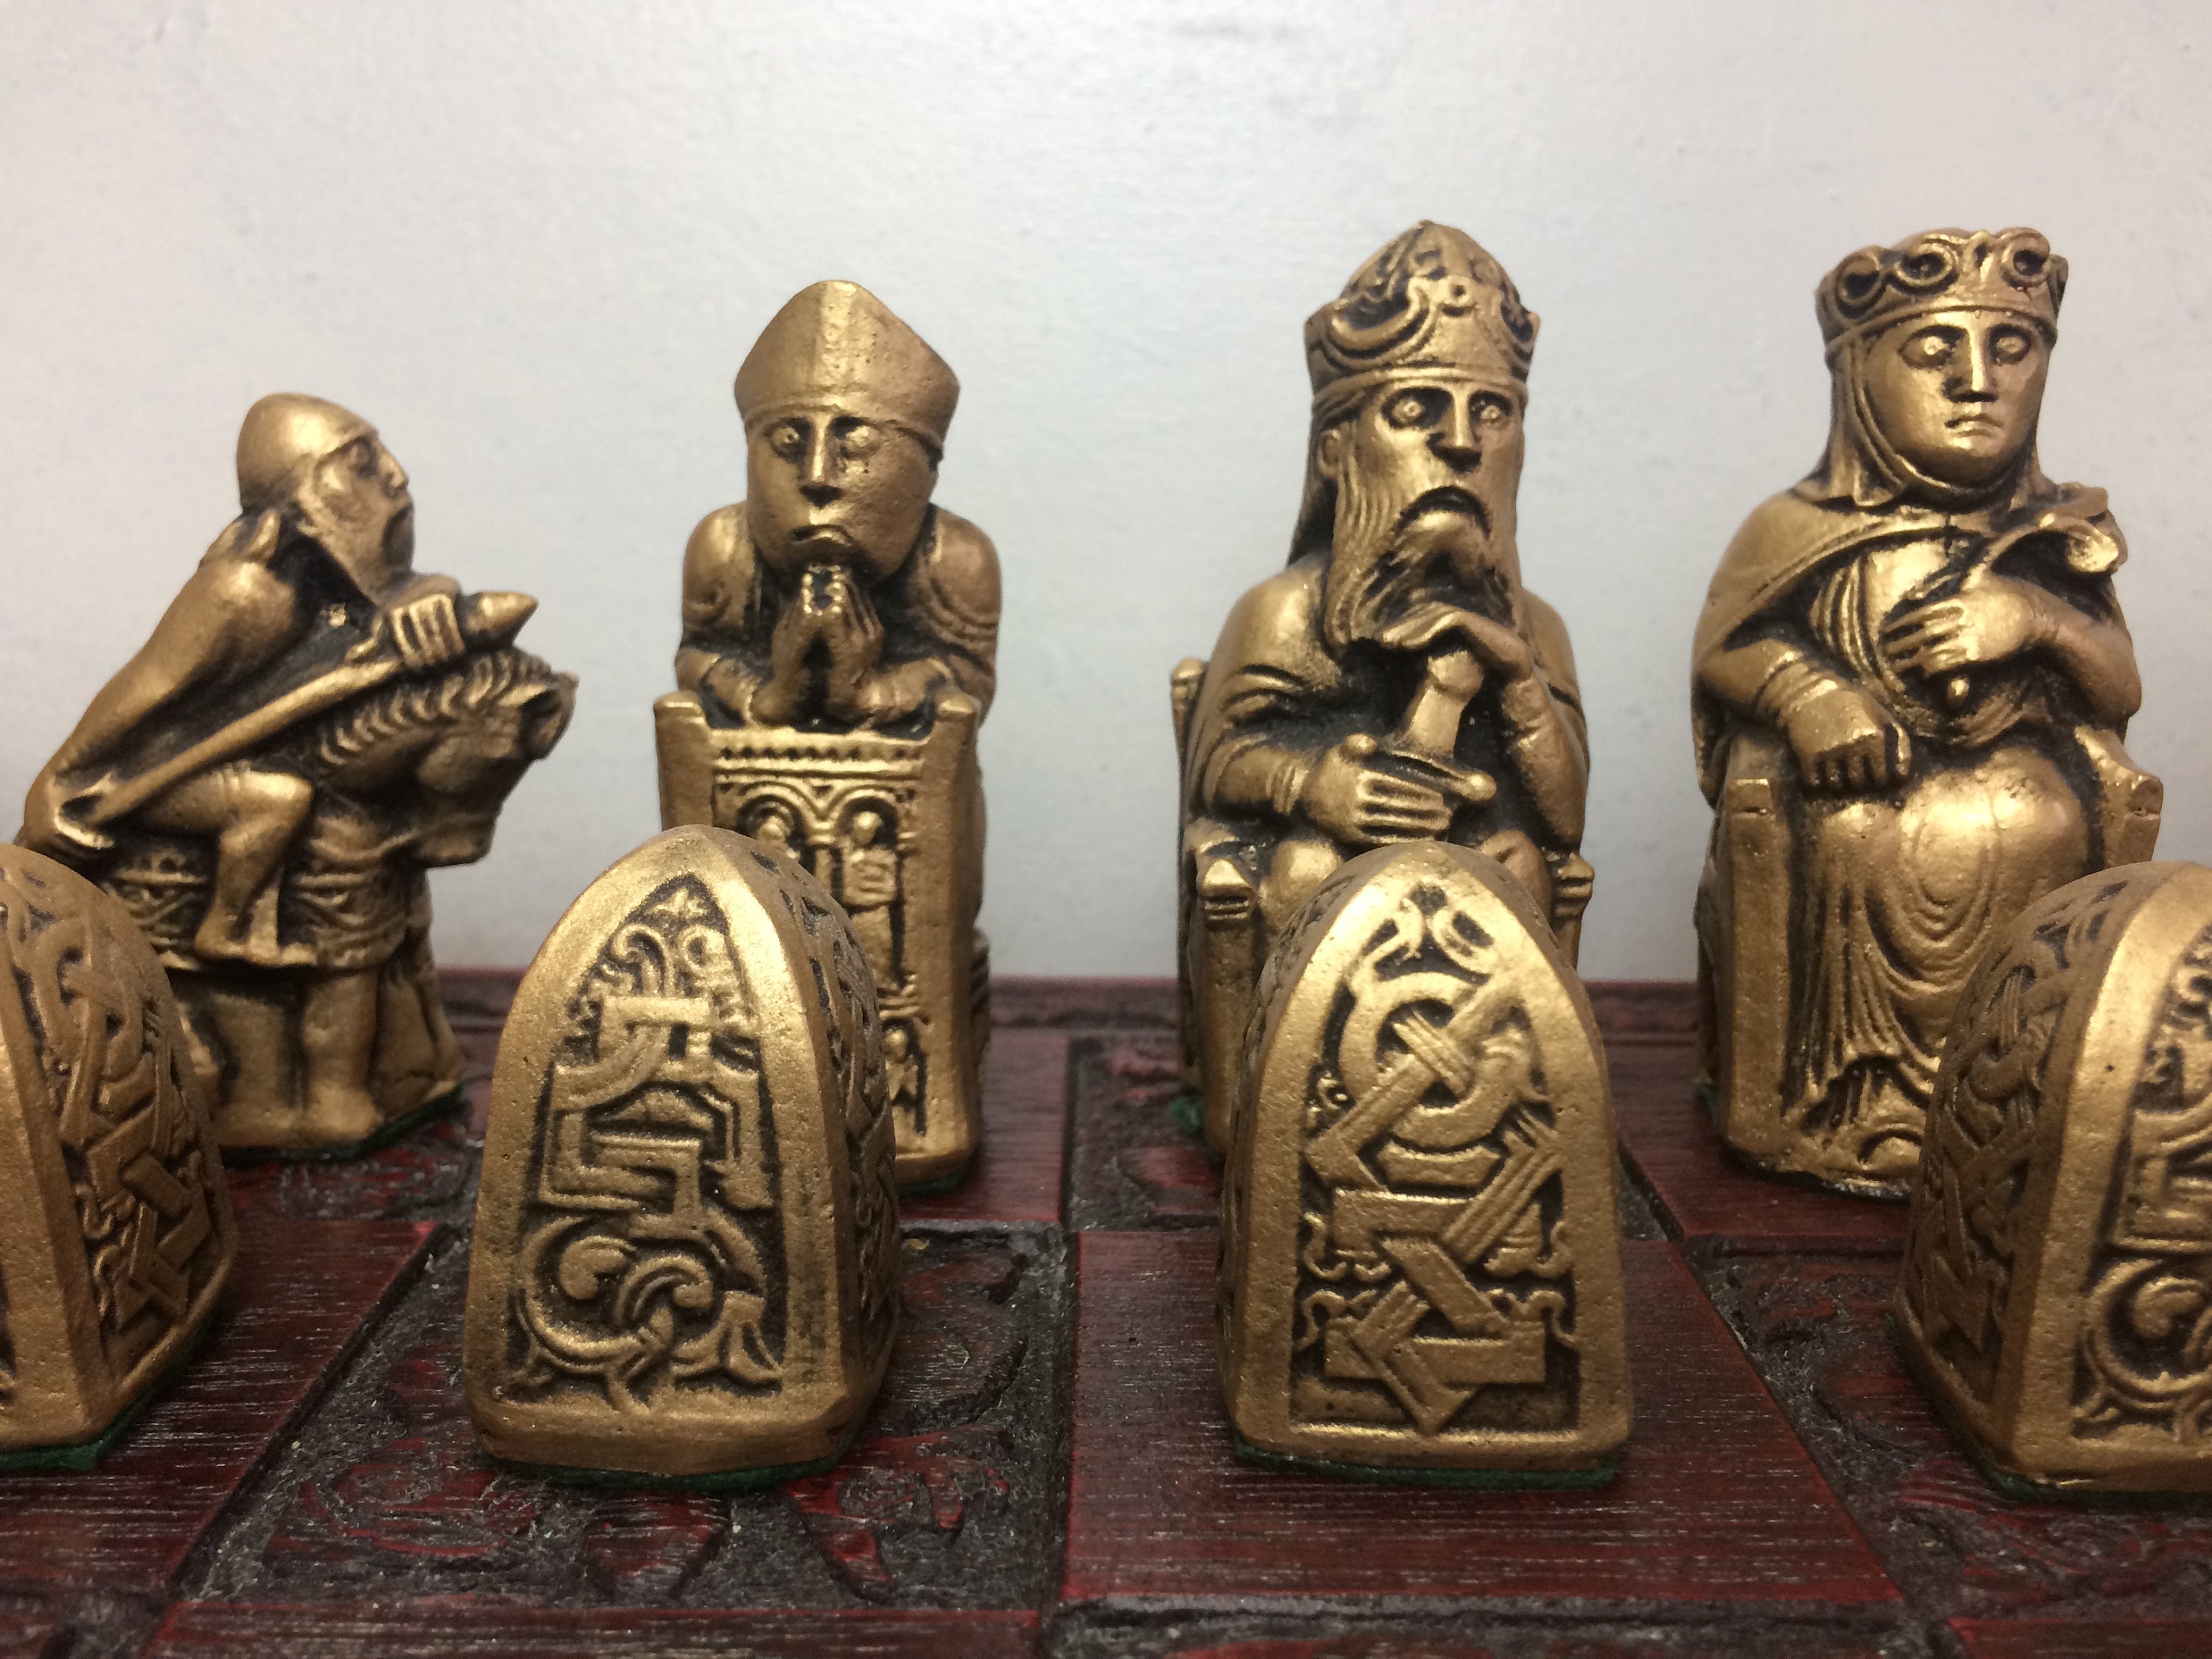 Medieval Chess Set - Large Gothic Busts Chess Set - Antique Gold and ...